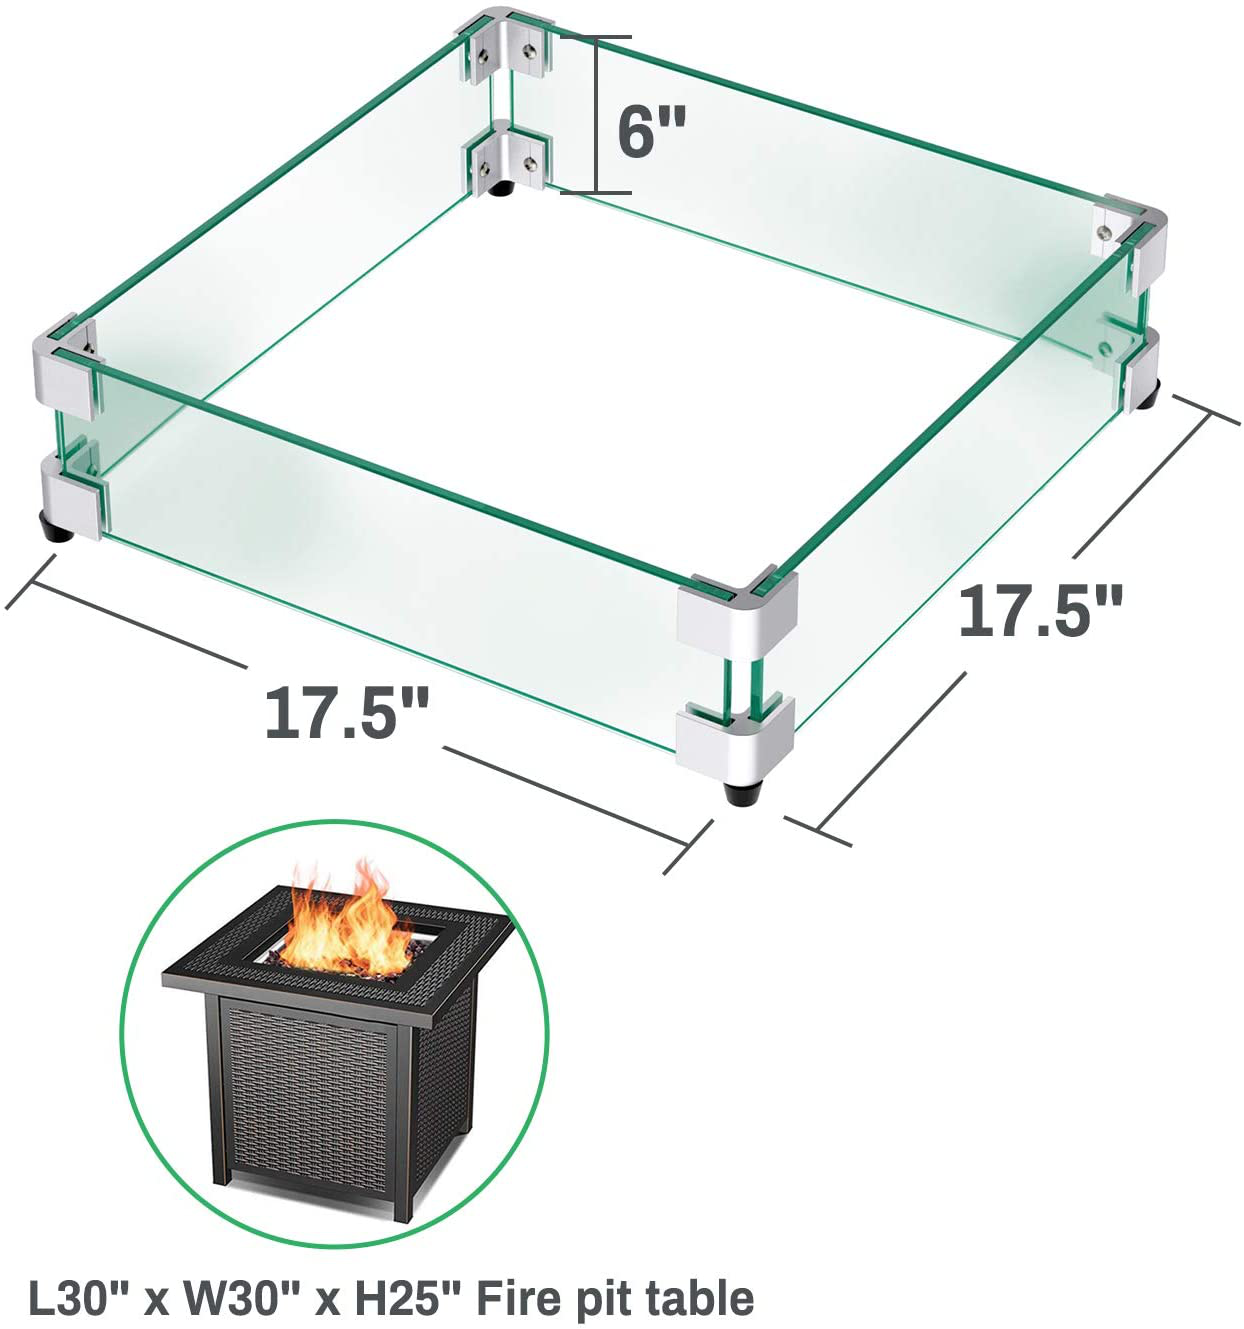 GASPRO 17.5 Inch Square Fire Pit Wind Guard for 28-32 Inch Fire Table and 12 Inch Drop-in Fire Pit Pan, 5/16 Inch Thick